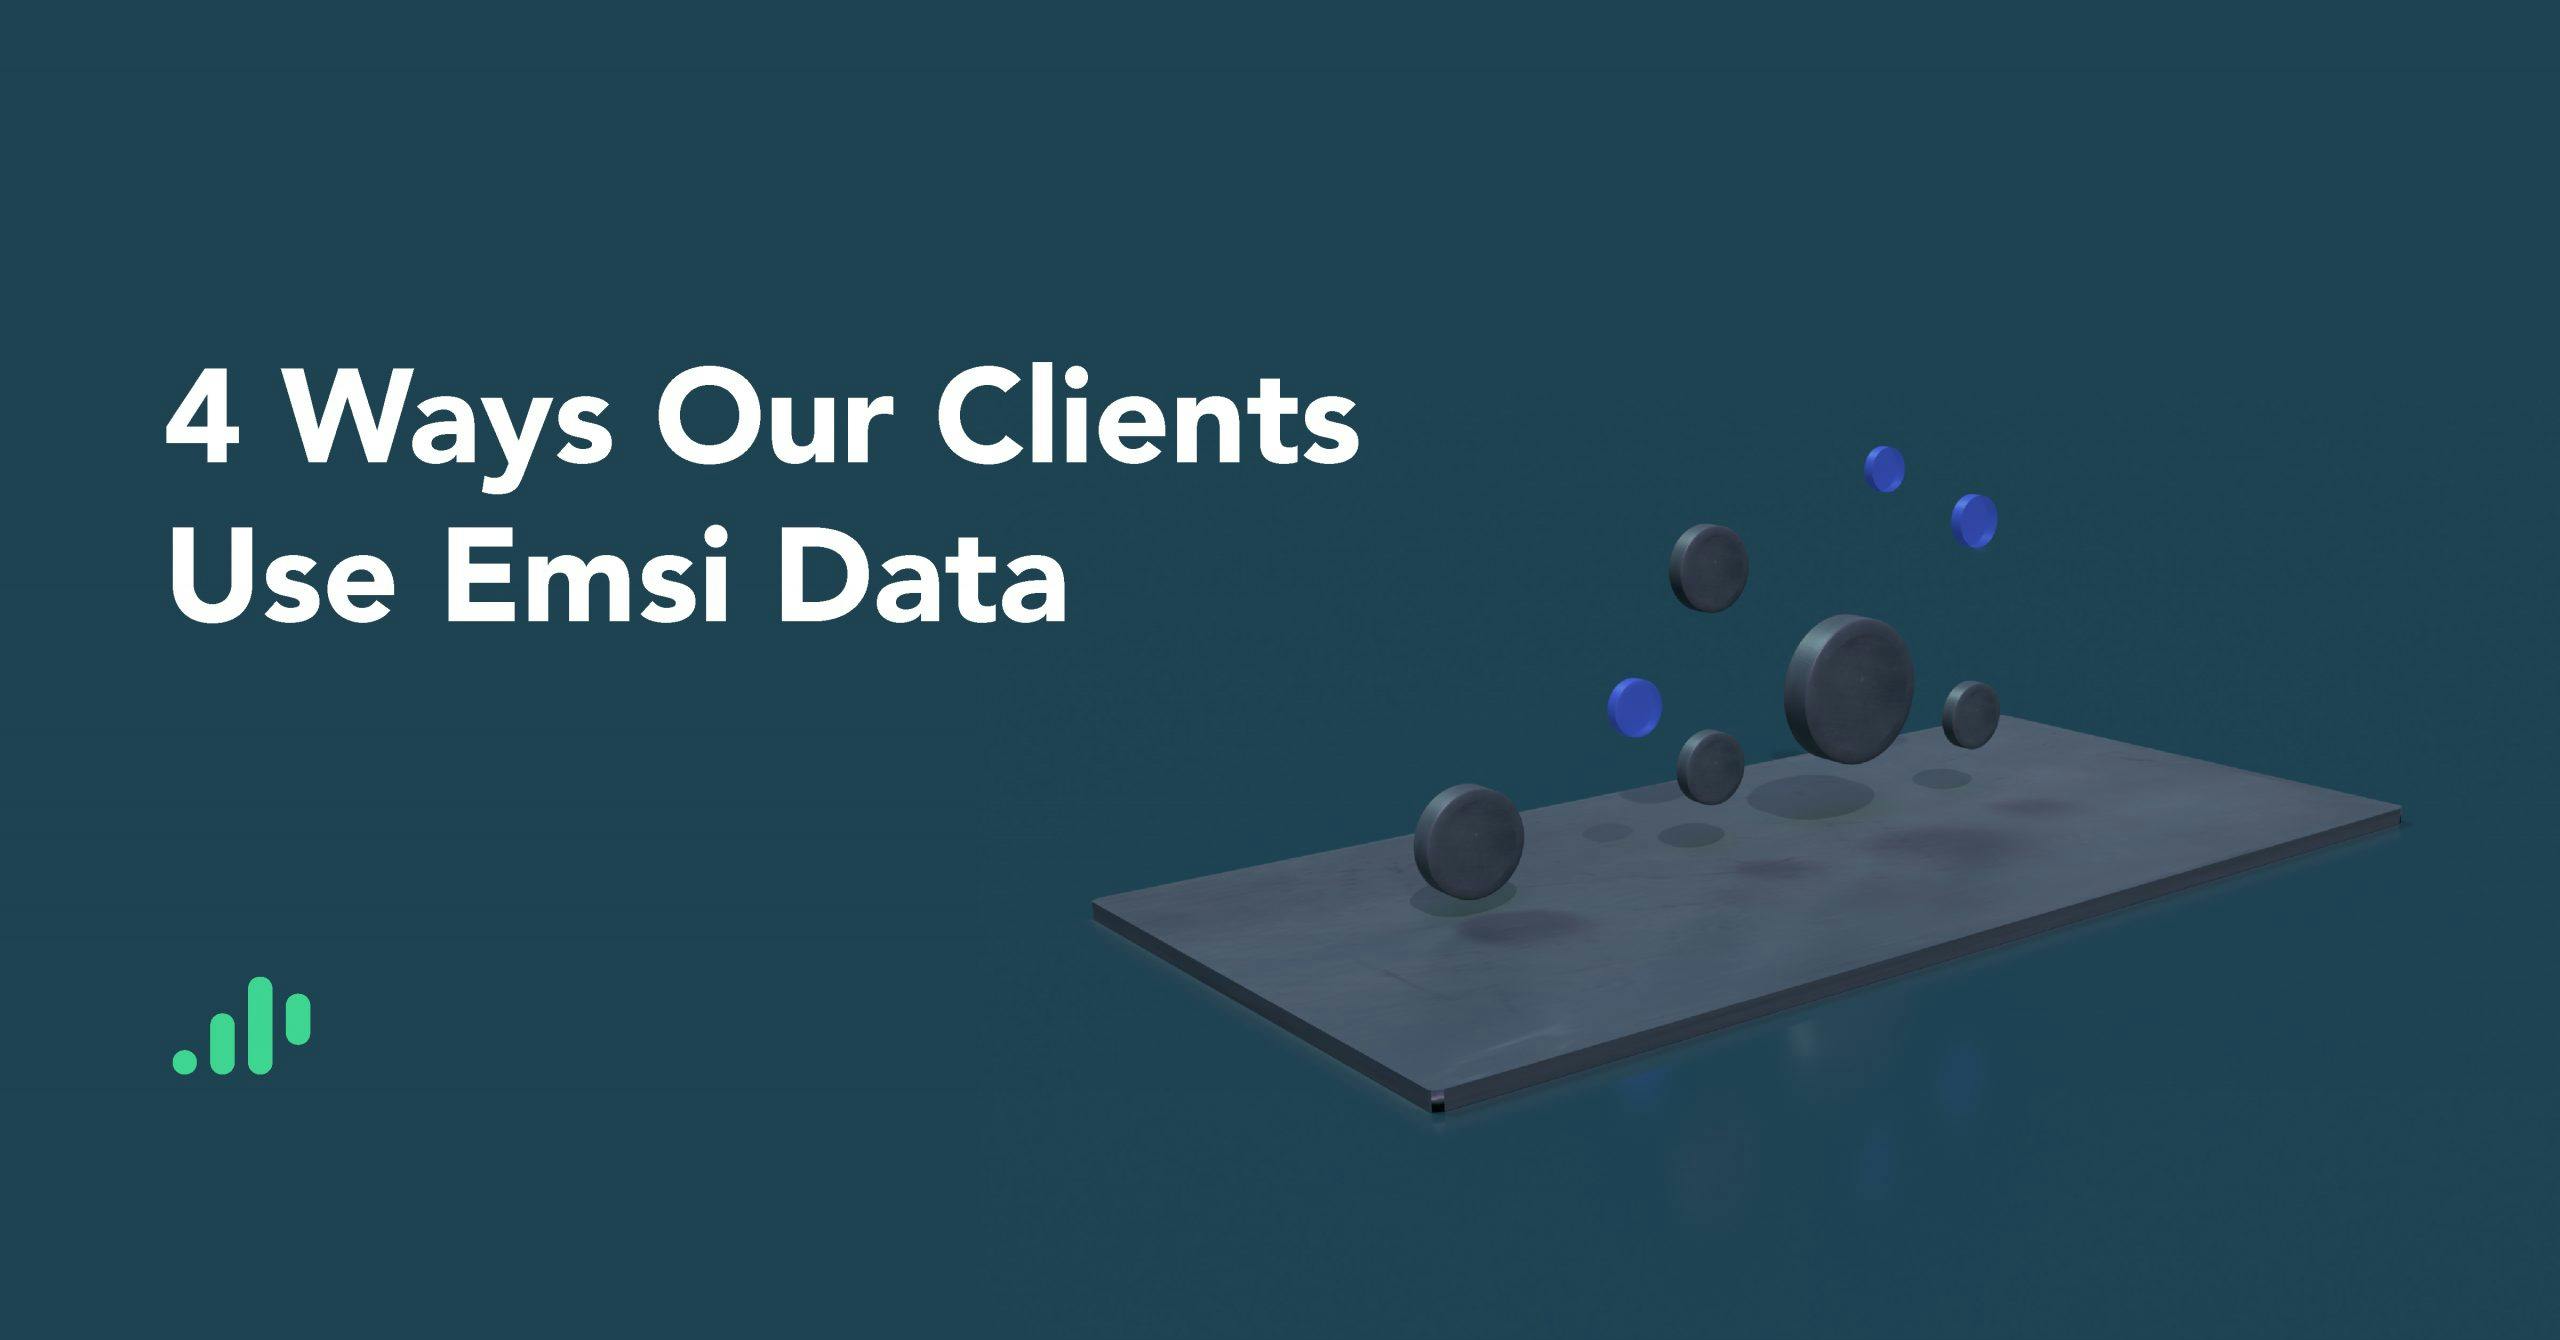 4 Ways Our Clients Use Emsi Data